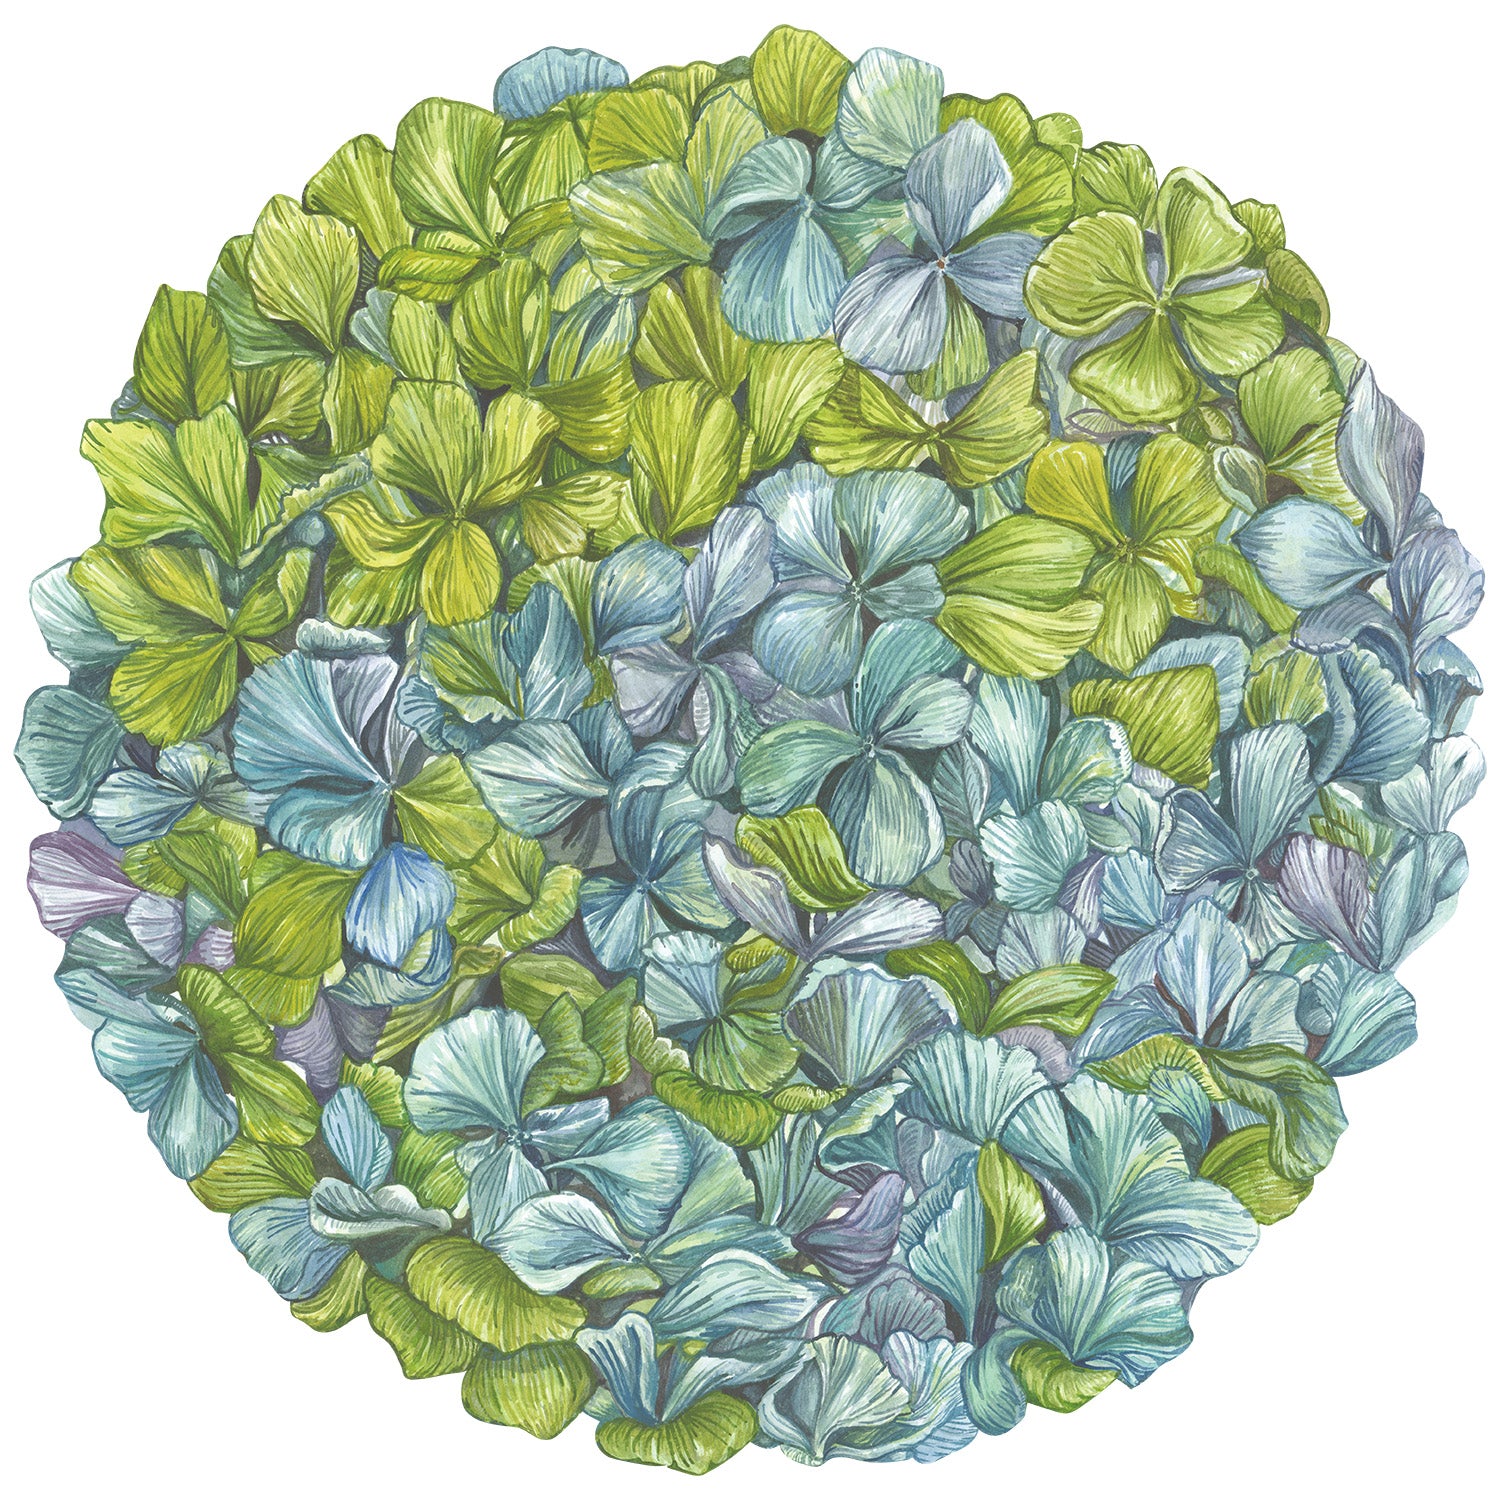 An Hester &amp; Cook Die-cut Hydrangea Placemat of green and blue leaves.